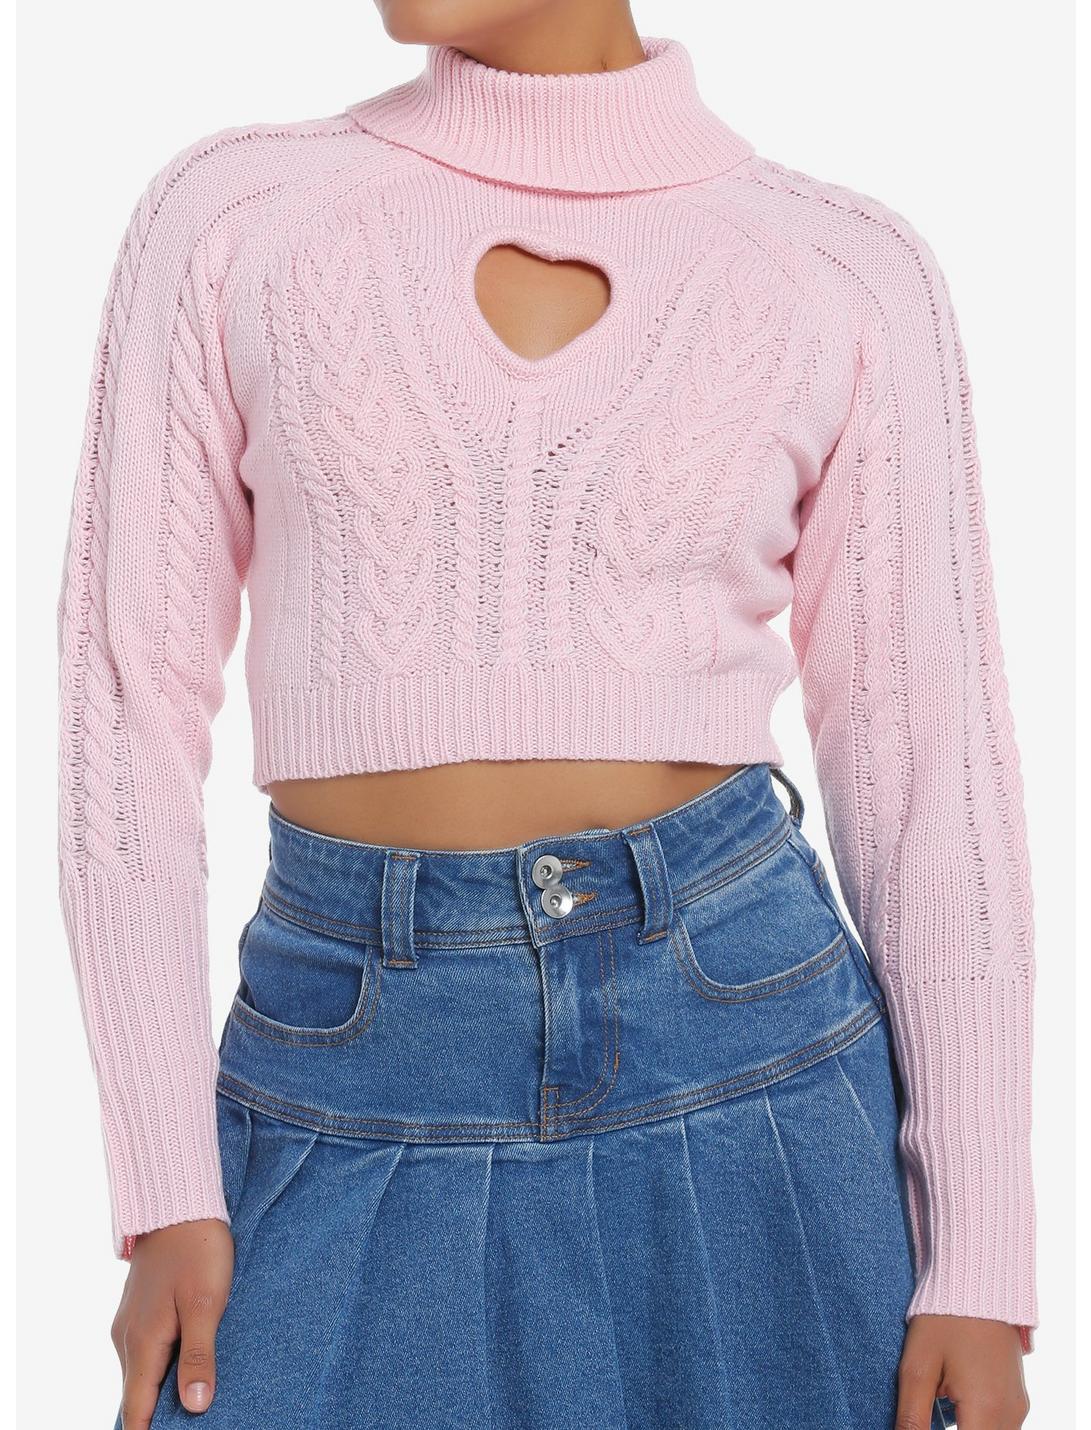 Sweet Society Pastel Pink Cable Knit Heart Girls Turtleneck Sweater